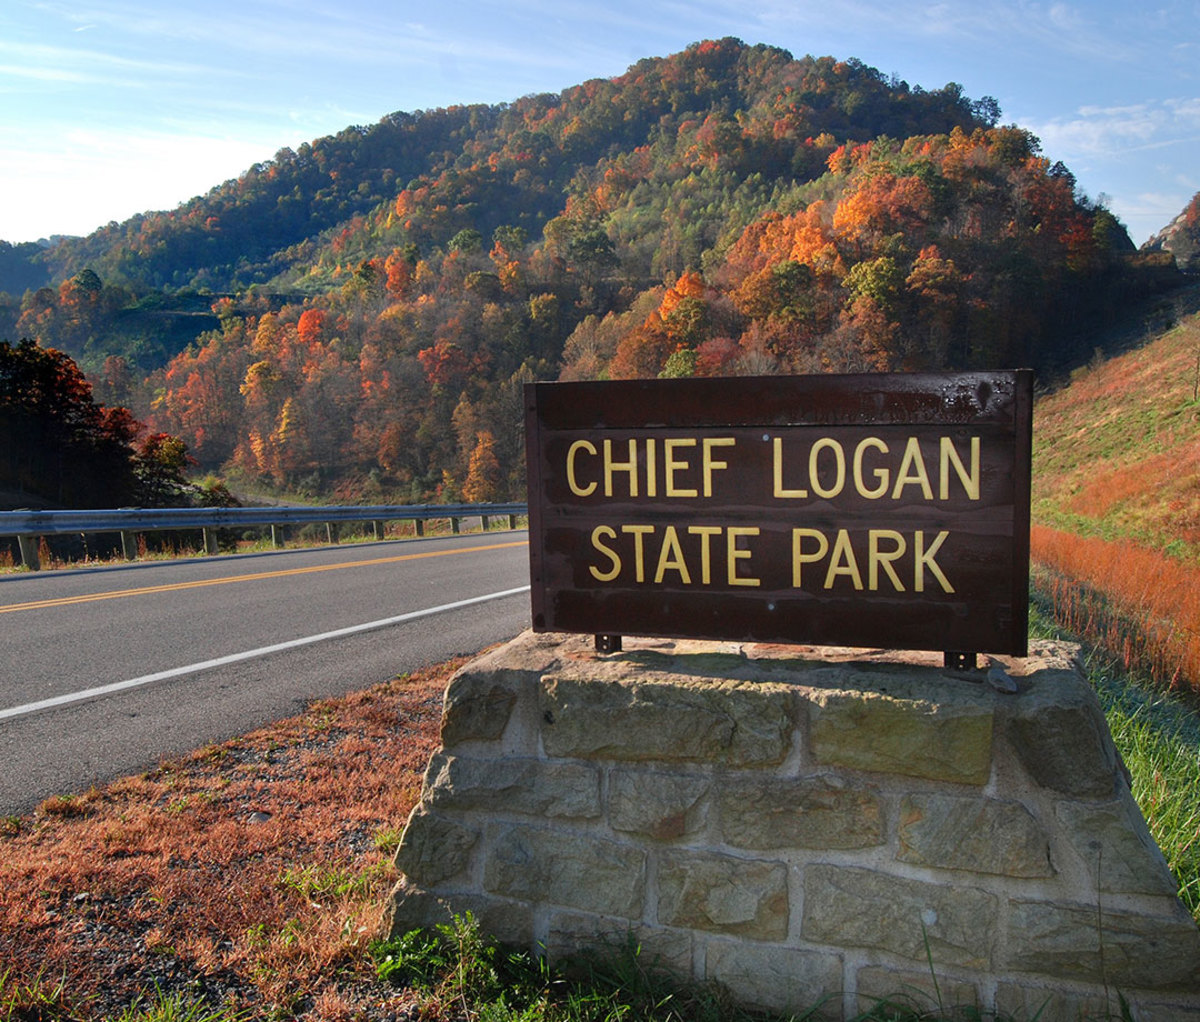 Sign of Chief Logan State Park in West Virginia